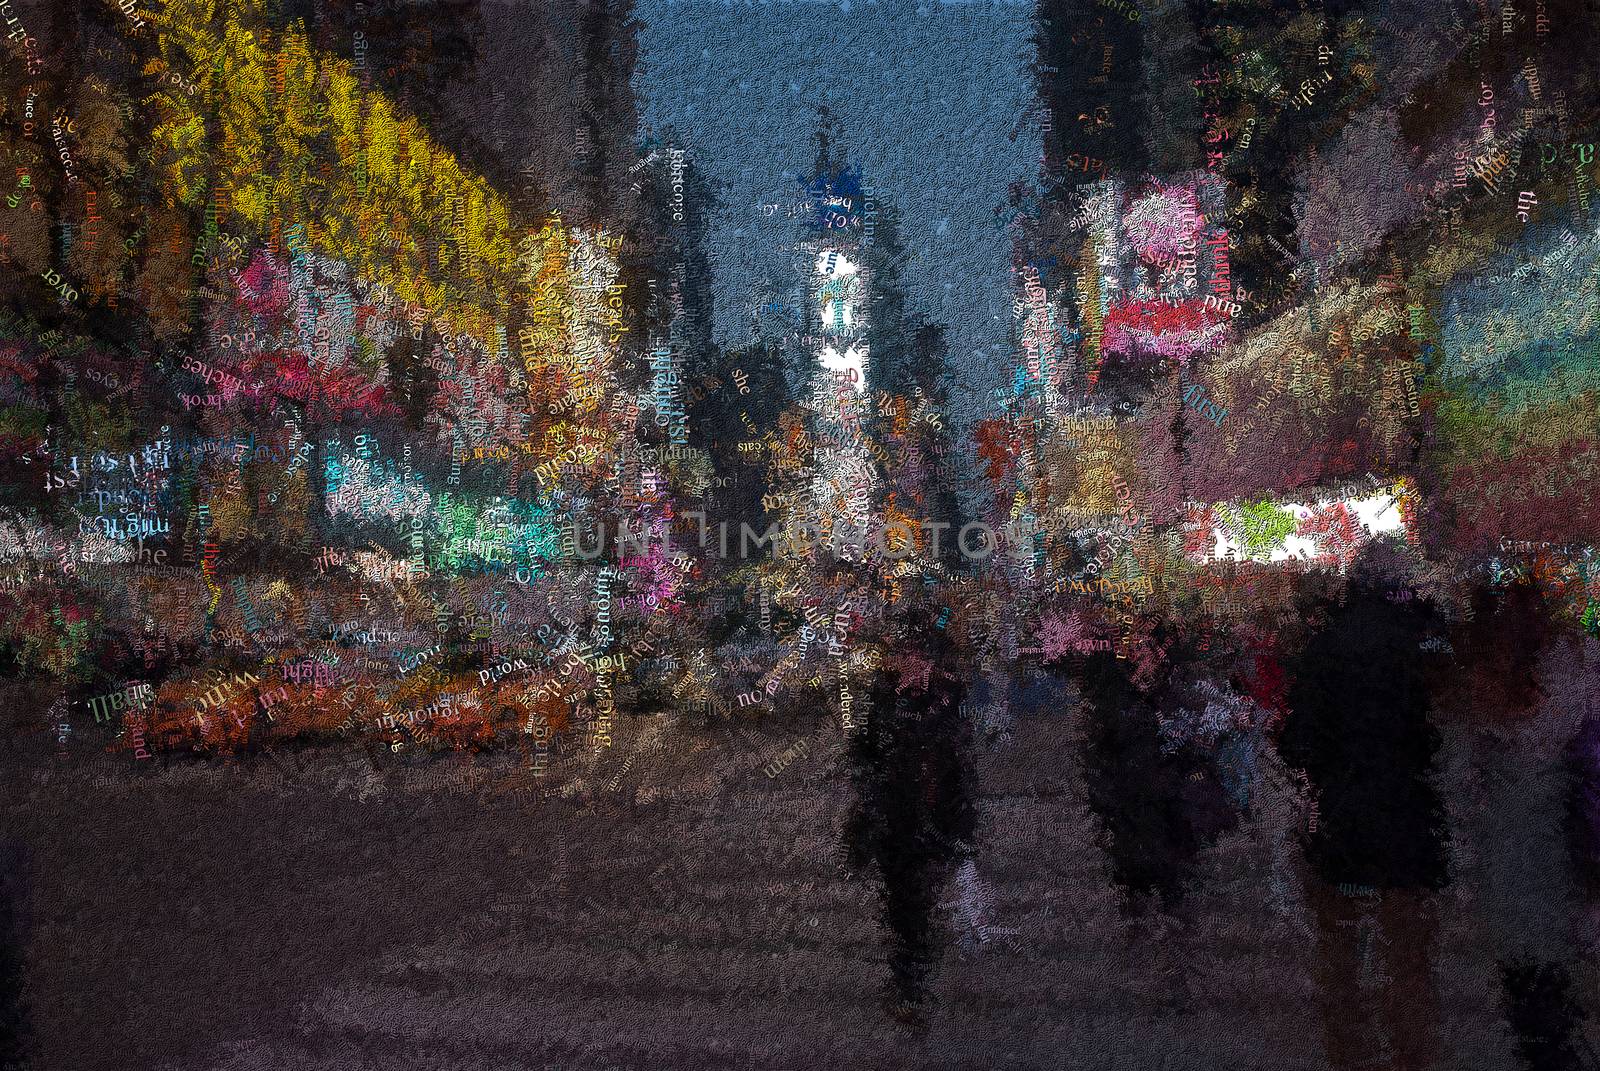 Time square. New York. Image composed entirely of words. 3D rendering